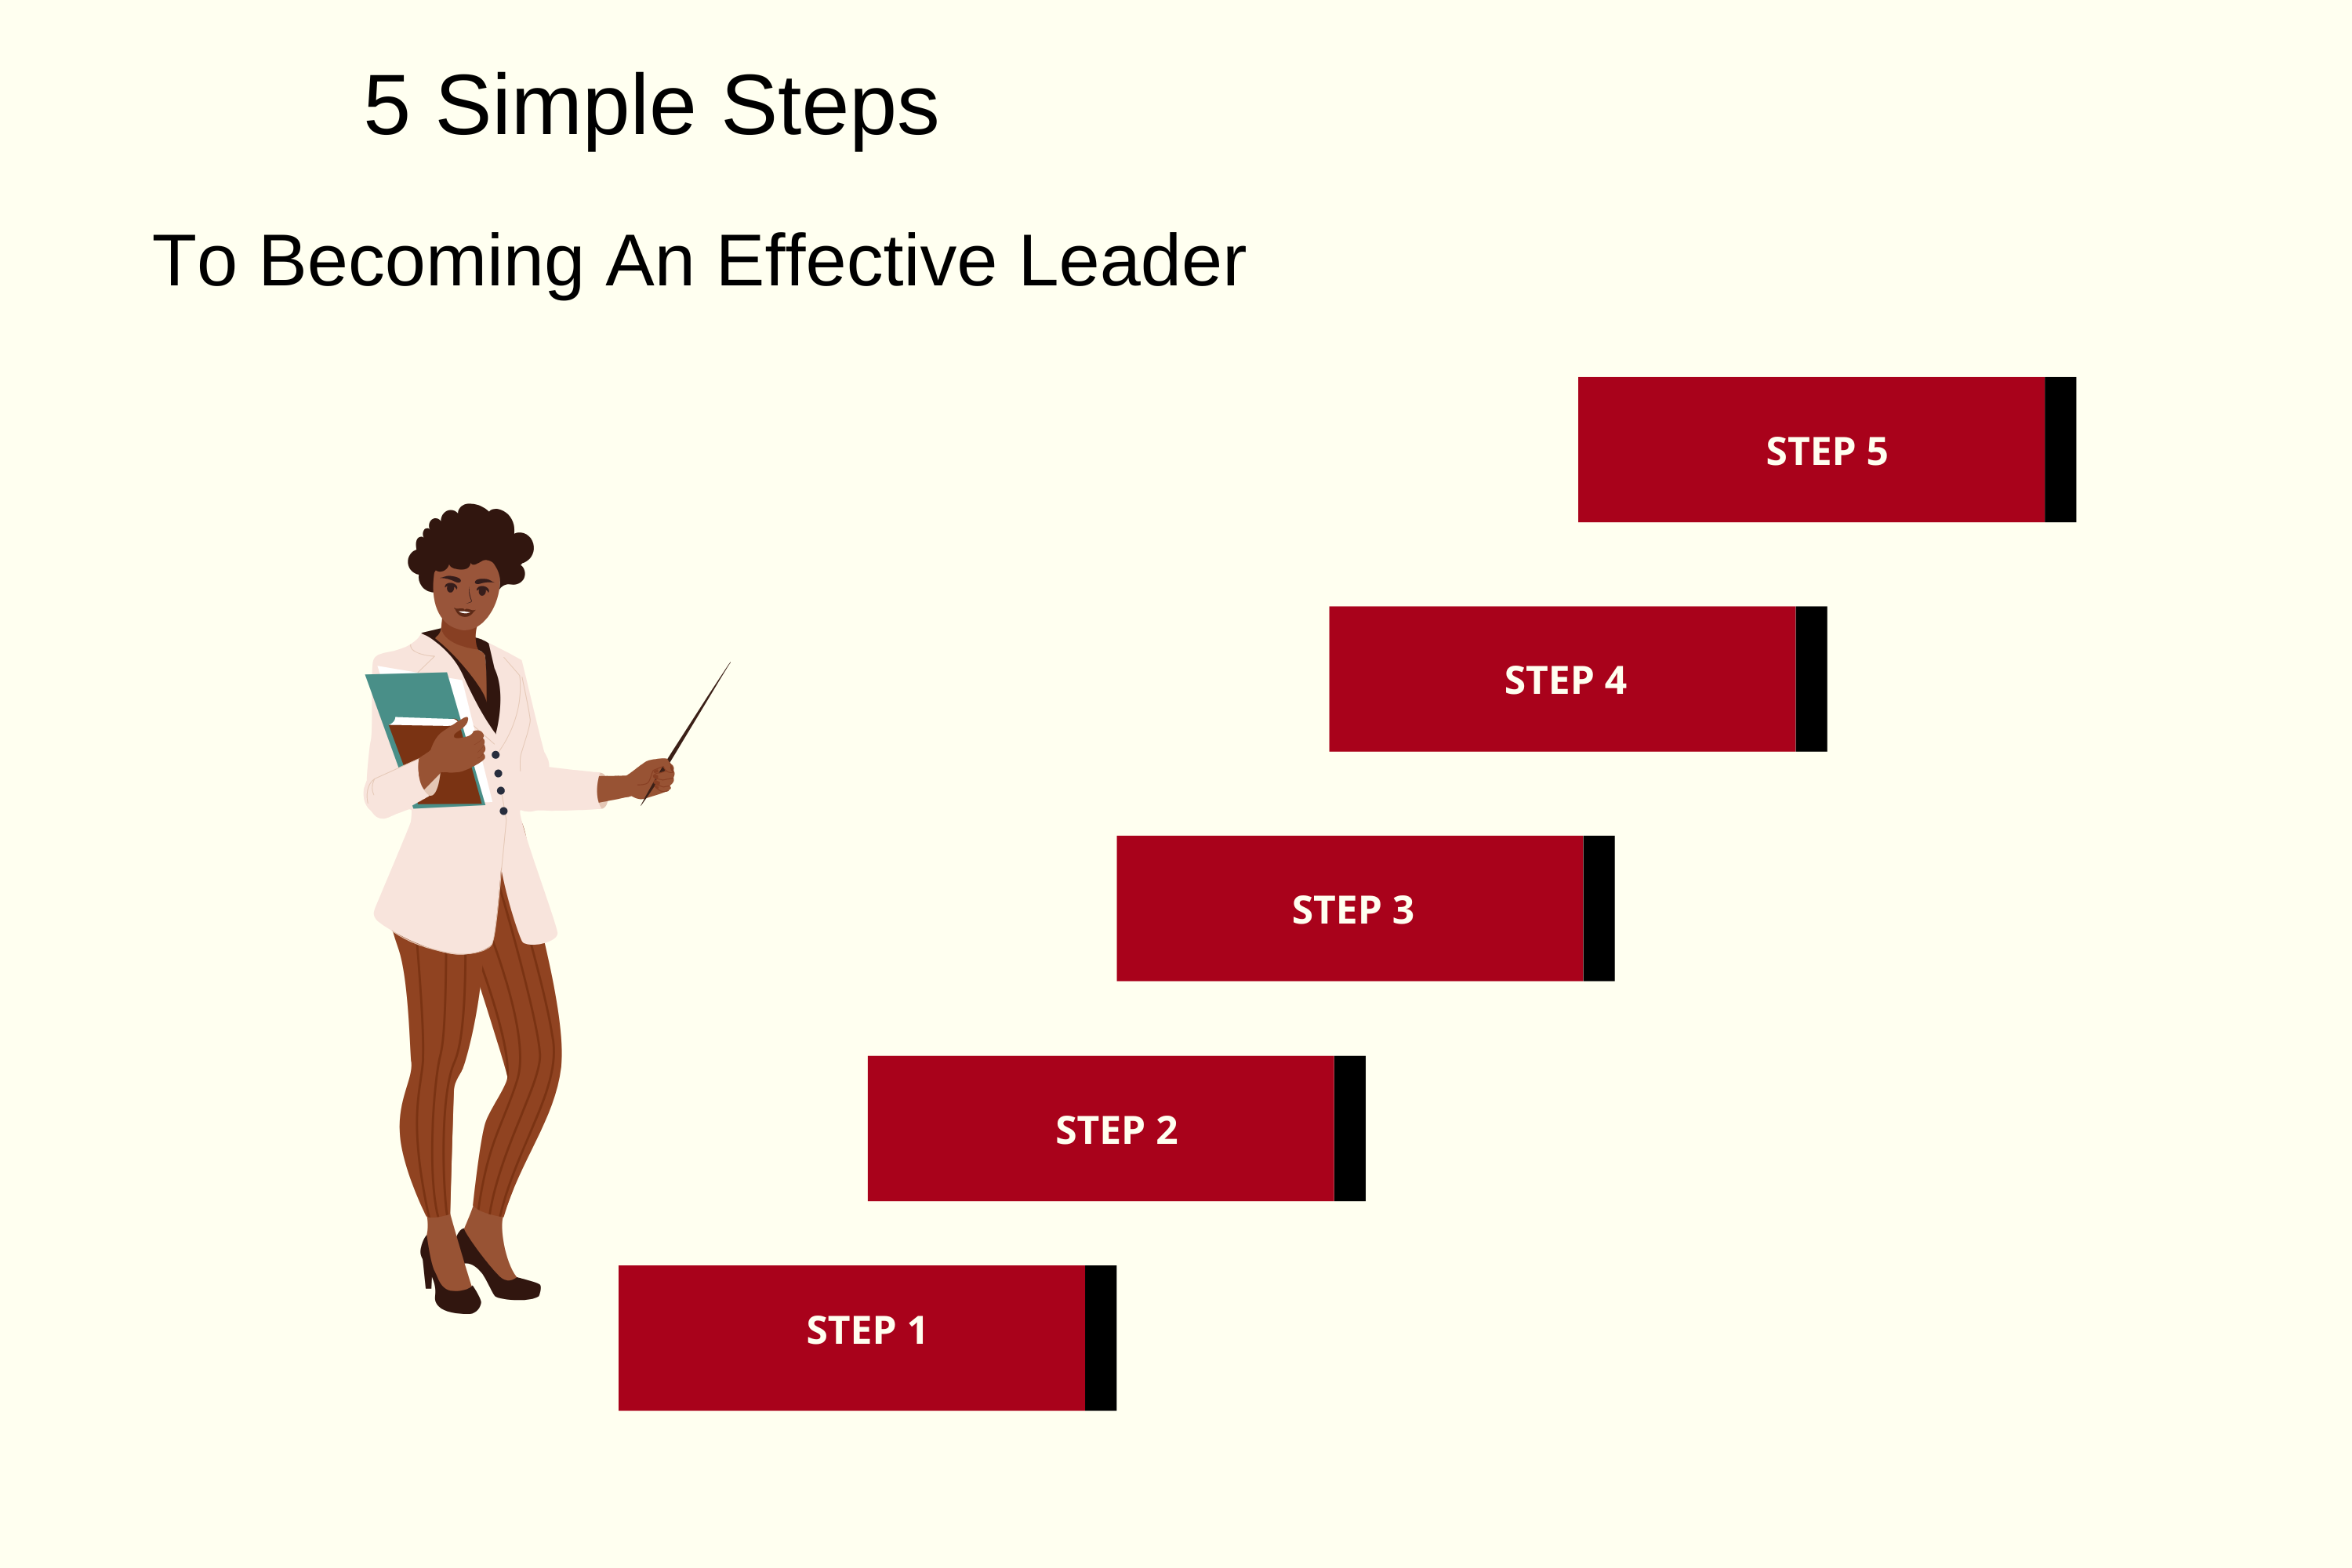 5 simple Steps for an effective leader